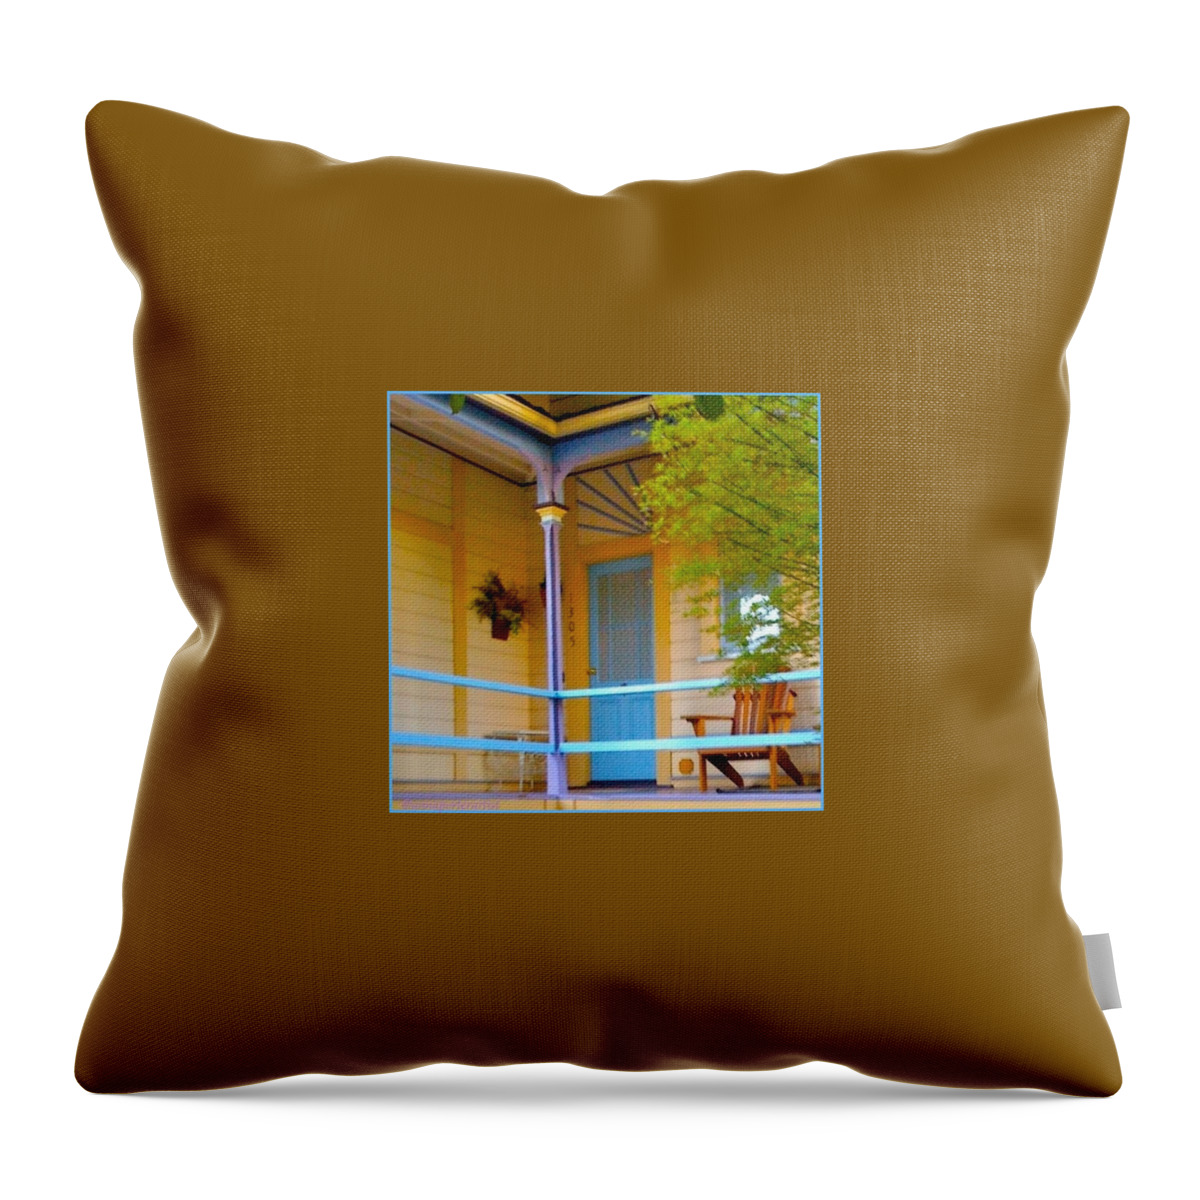 Doorsondoors Throw Pillow featuring the photograph The Door To Our Room At La Petite by Anna Porter